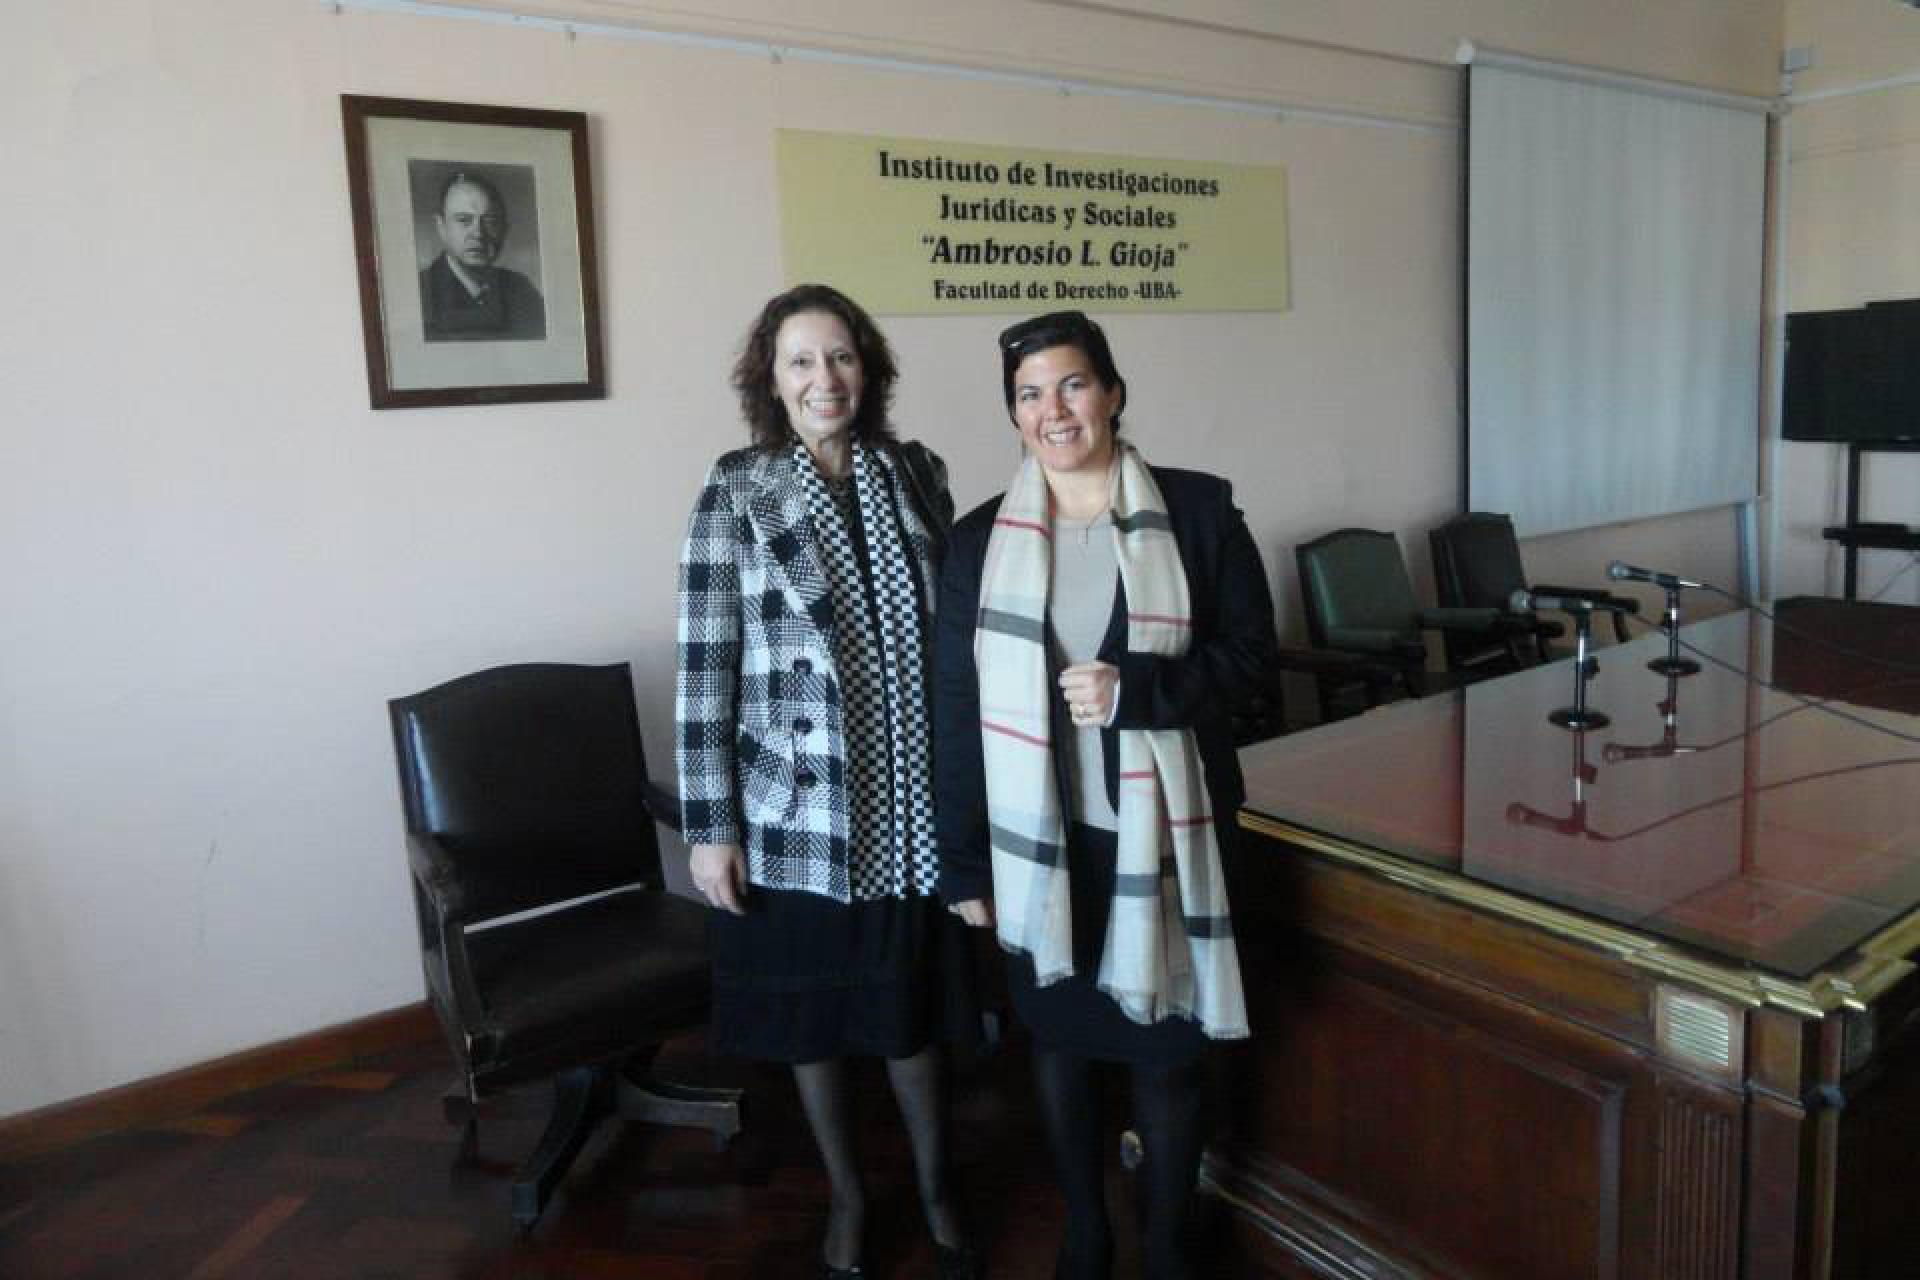 Professor Maria Blanca Noodt Taquela and Dr. Veronica Ruiz Abou-Nigm, at the Scoping Launch Workshop at the Gioja Institute, University of Buenos Aires